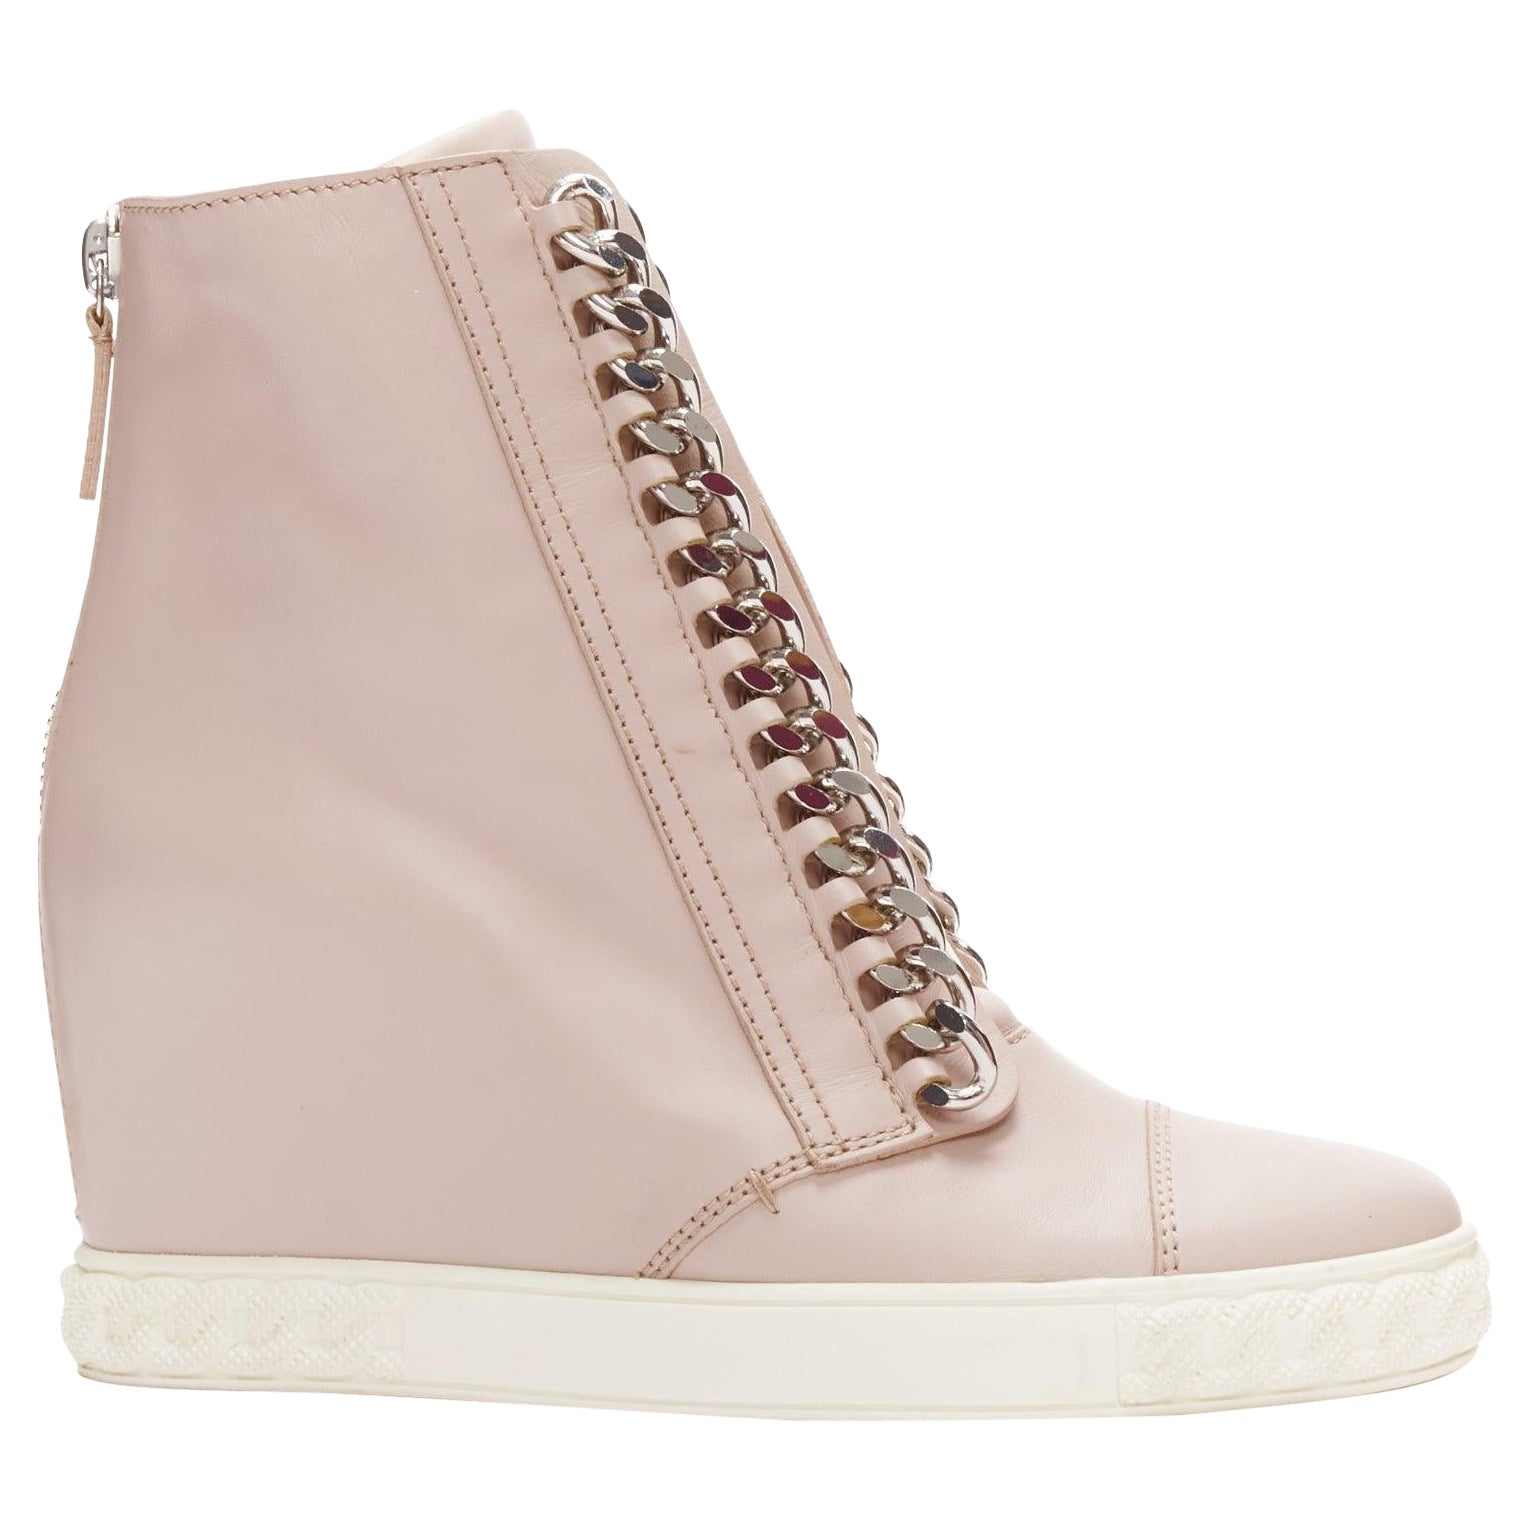 CASADEI pink leather silver chain trim ankle wedge sneakers EU39.5 For Sale